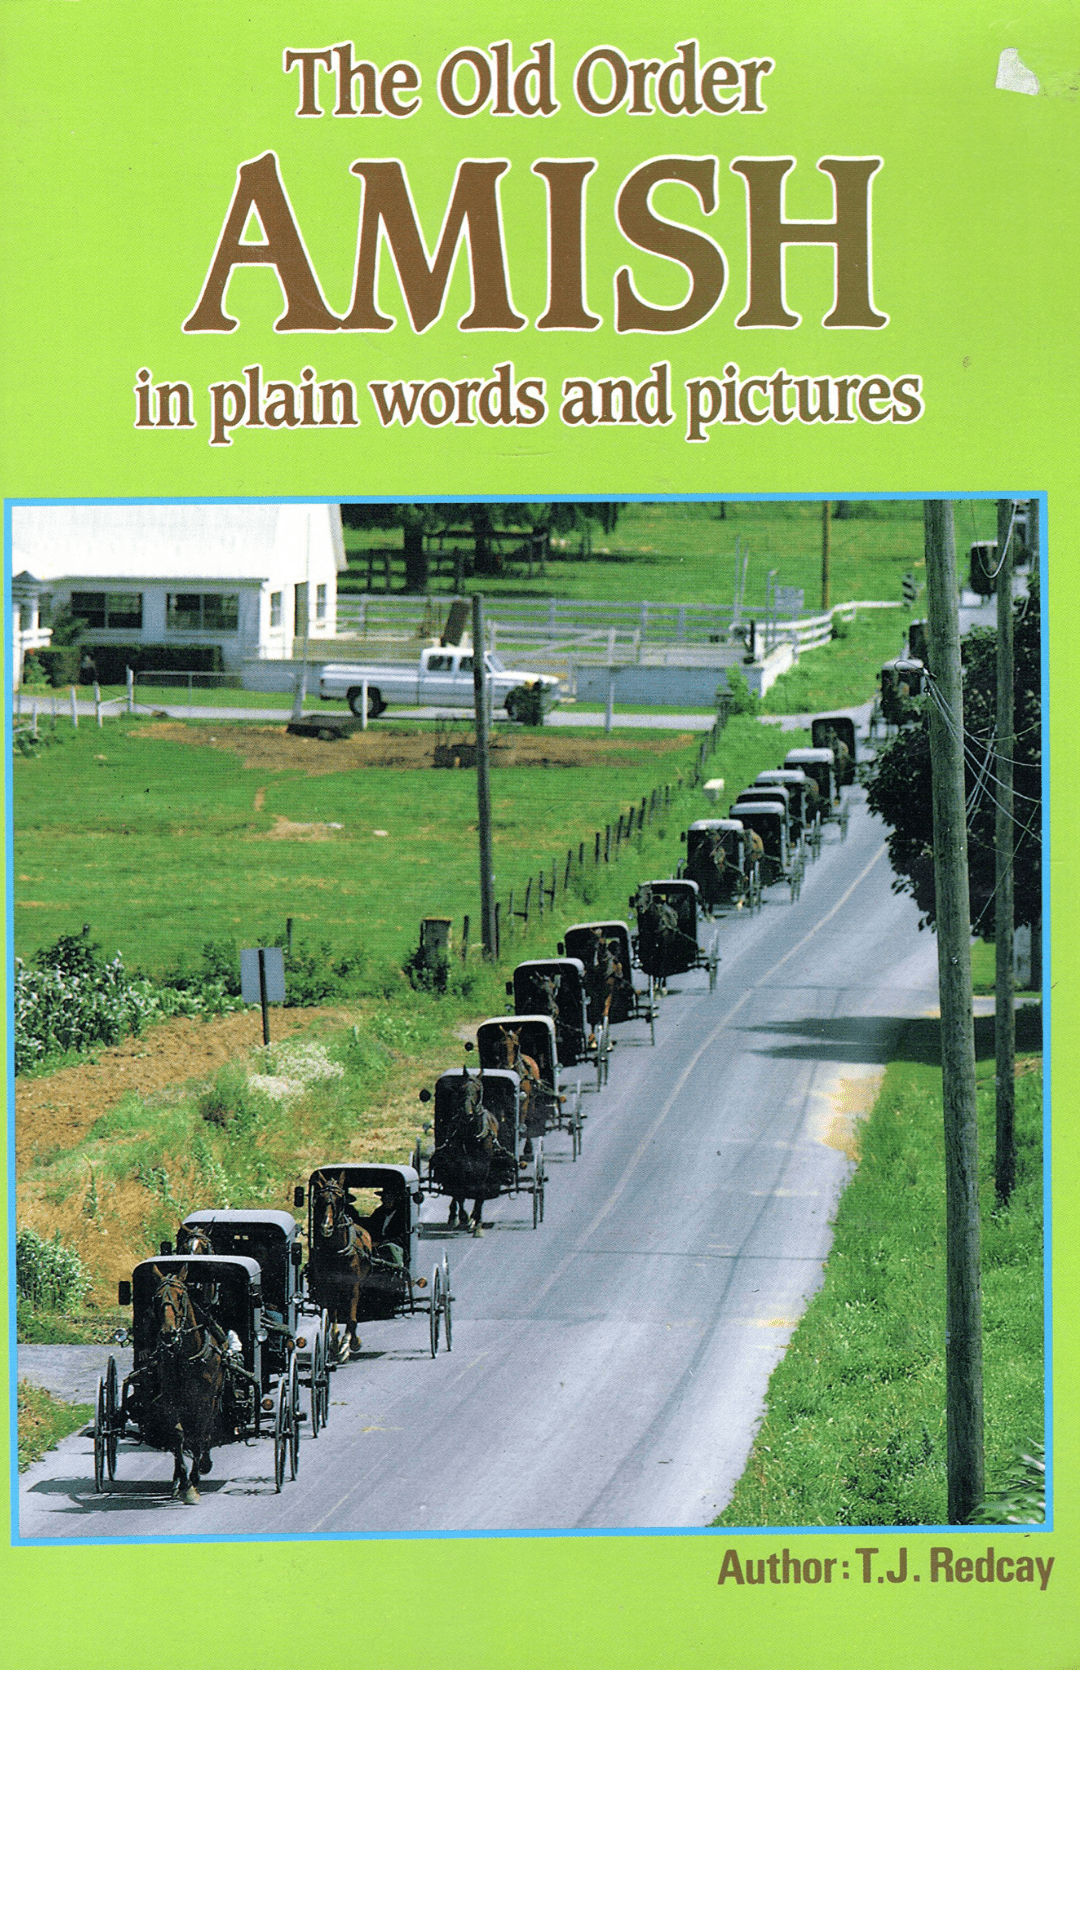 The Old Order Amish in Plain Words and Pictures